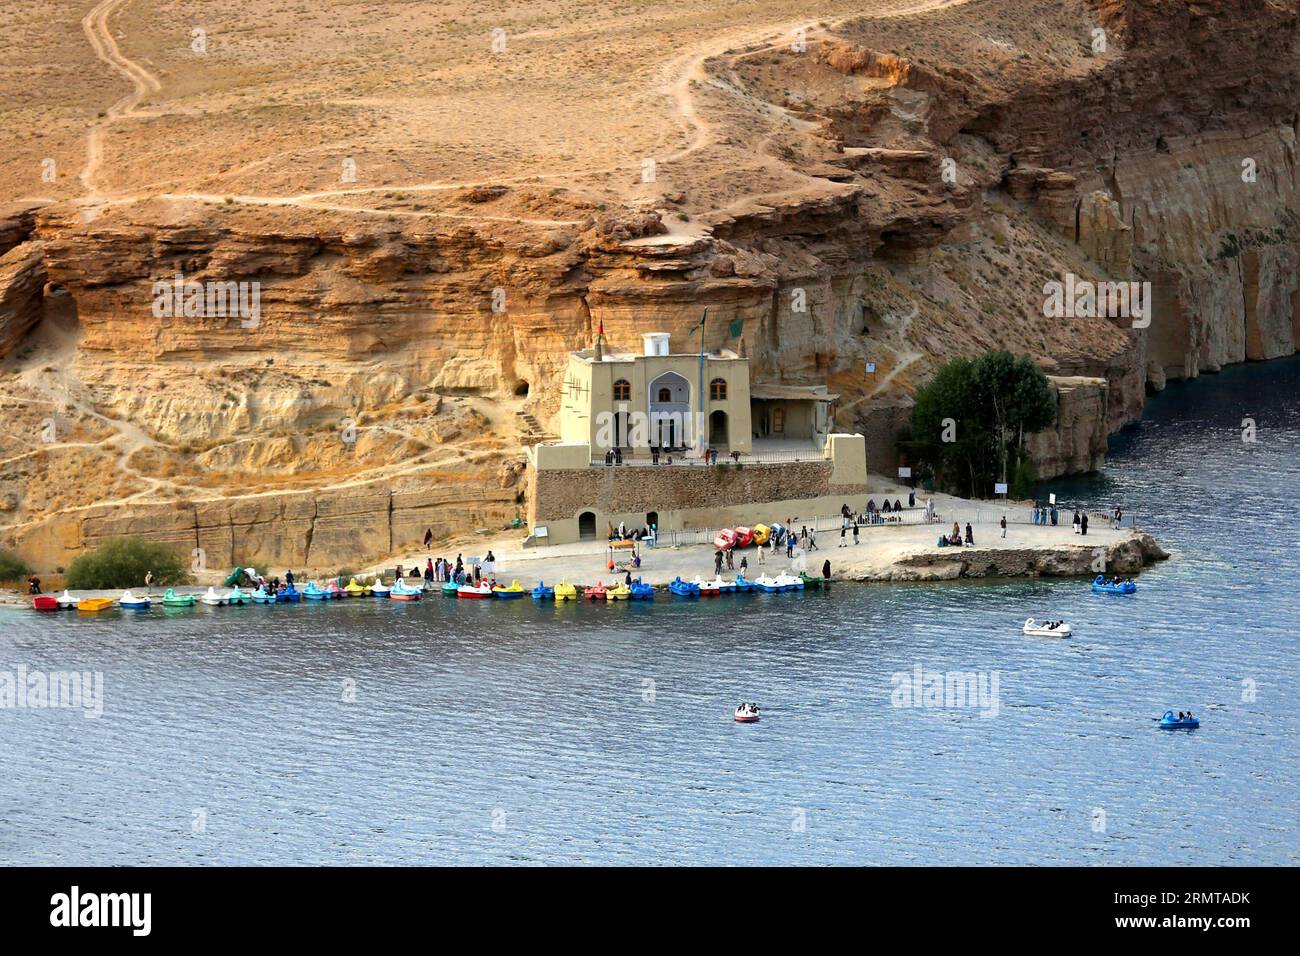 (140825) -- BAMYAN, Aug. 25, 2014 -- Afghan people gather around the Band-e-Amir Lake in Bamyan, central Afghanistan, on Aug. 23, 2014. ) AFGHANISTAN-BAMYAN-LAKE Kamran PUBLICATIONxNOTxINxCHN   Bamyan Aug 25 2014 Afghan Celebrities gather Around The Tie e Amir Lake in Bamyan Central Afghanistan ON Aug 23 2014 Afghanistan Bamyan Lake Kamran PUBLICATIONxNOTxINxCHN Stock Photo